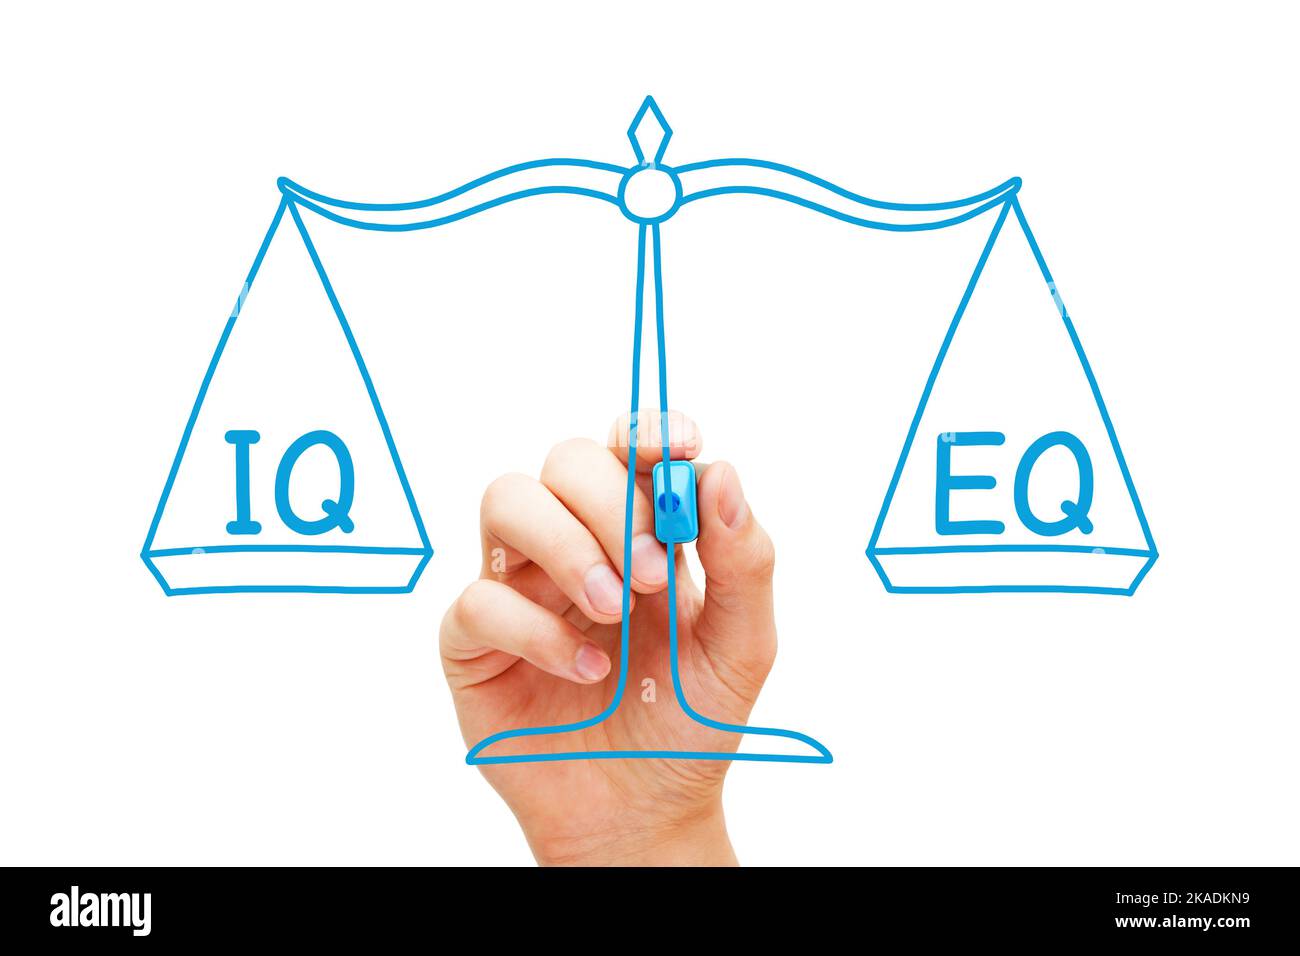 Hand drawing a concept about IQ intelligence quotient and EQ emotional intelligence quotient weighted on scale. Stock Photo